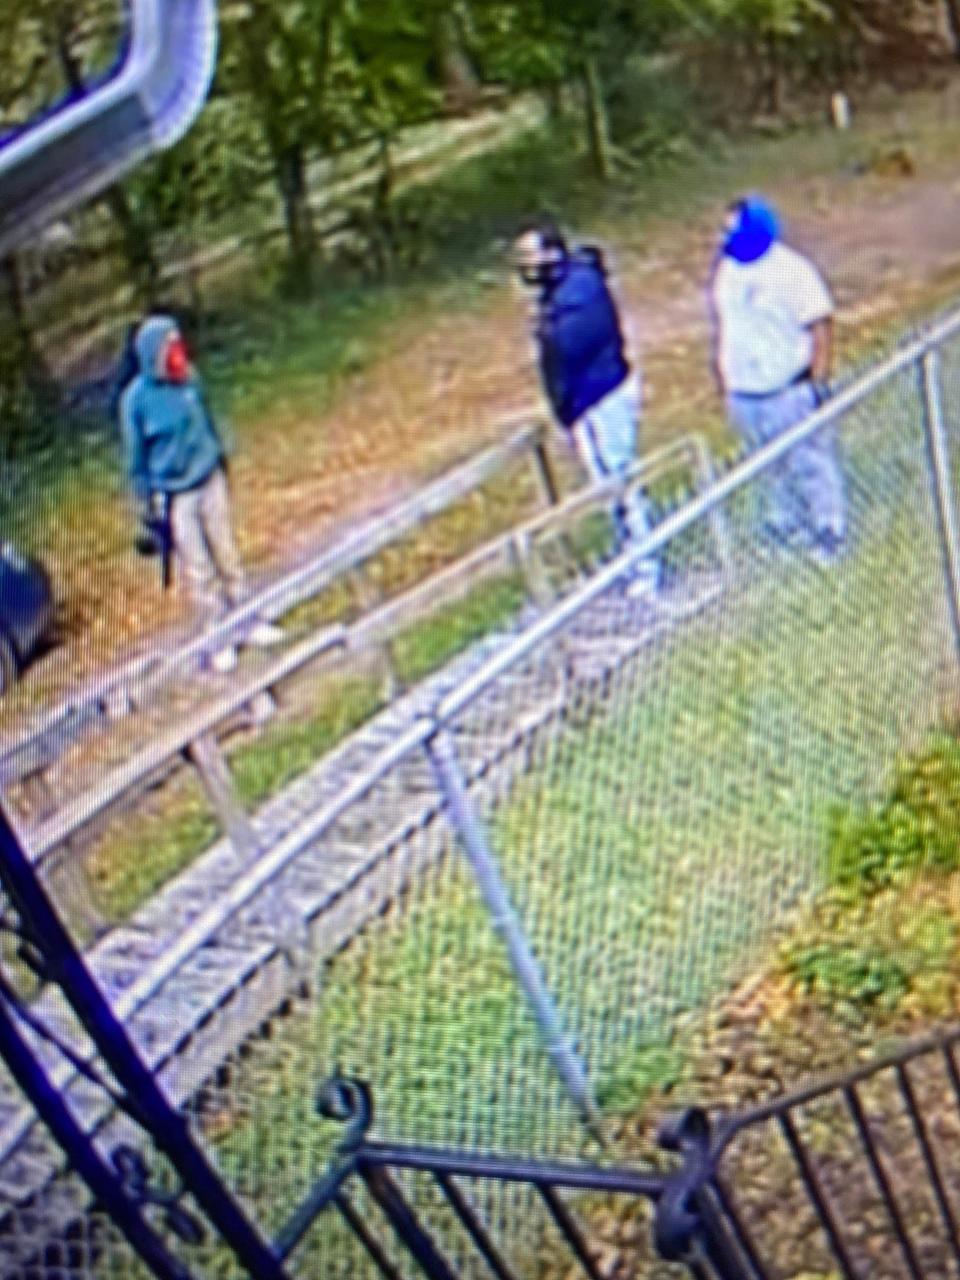 LMPD is searching for the two men on the right, wearing a blue hoodie and a white shirt, in connection to a 2020 homicide.